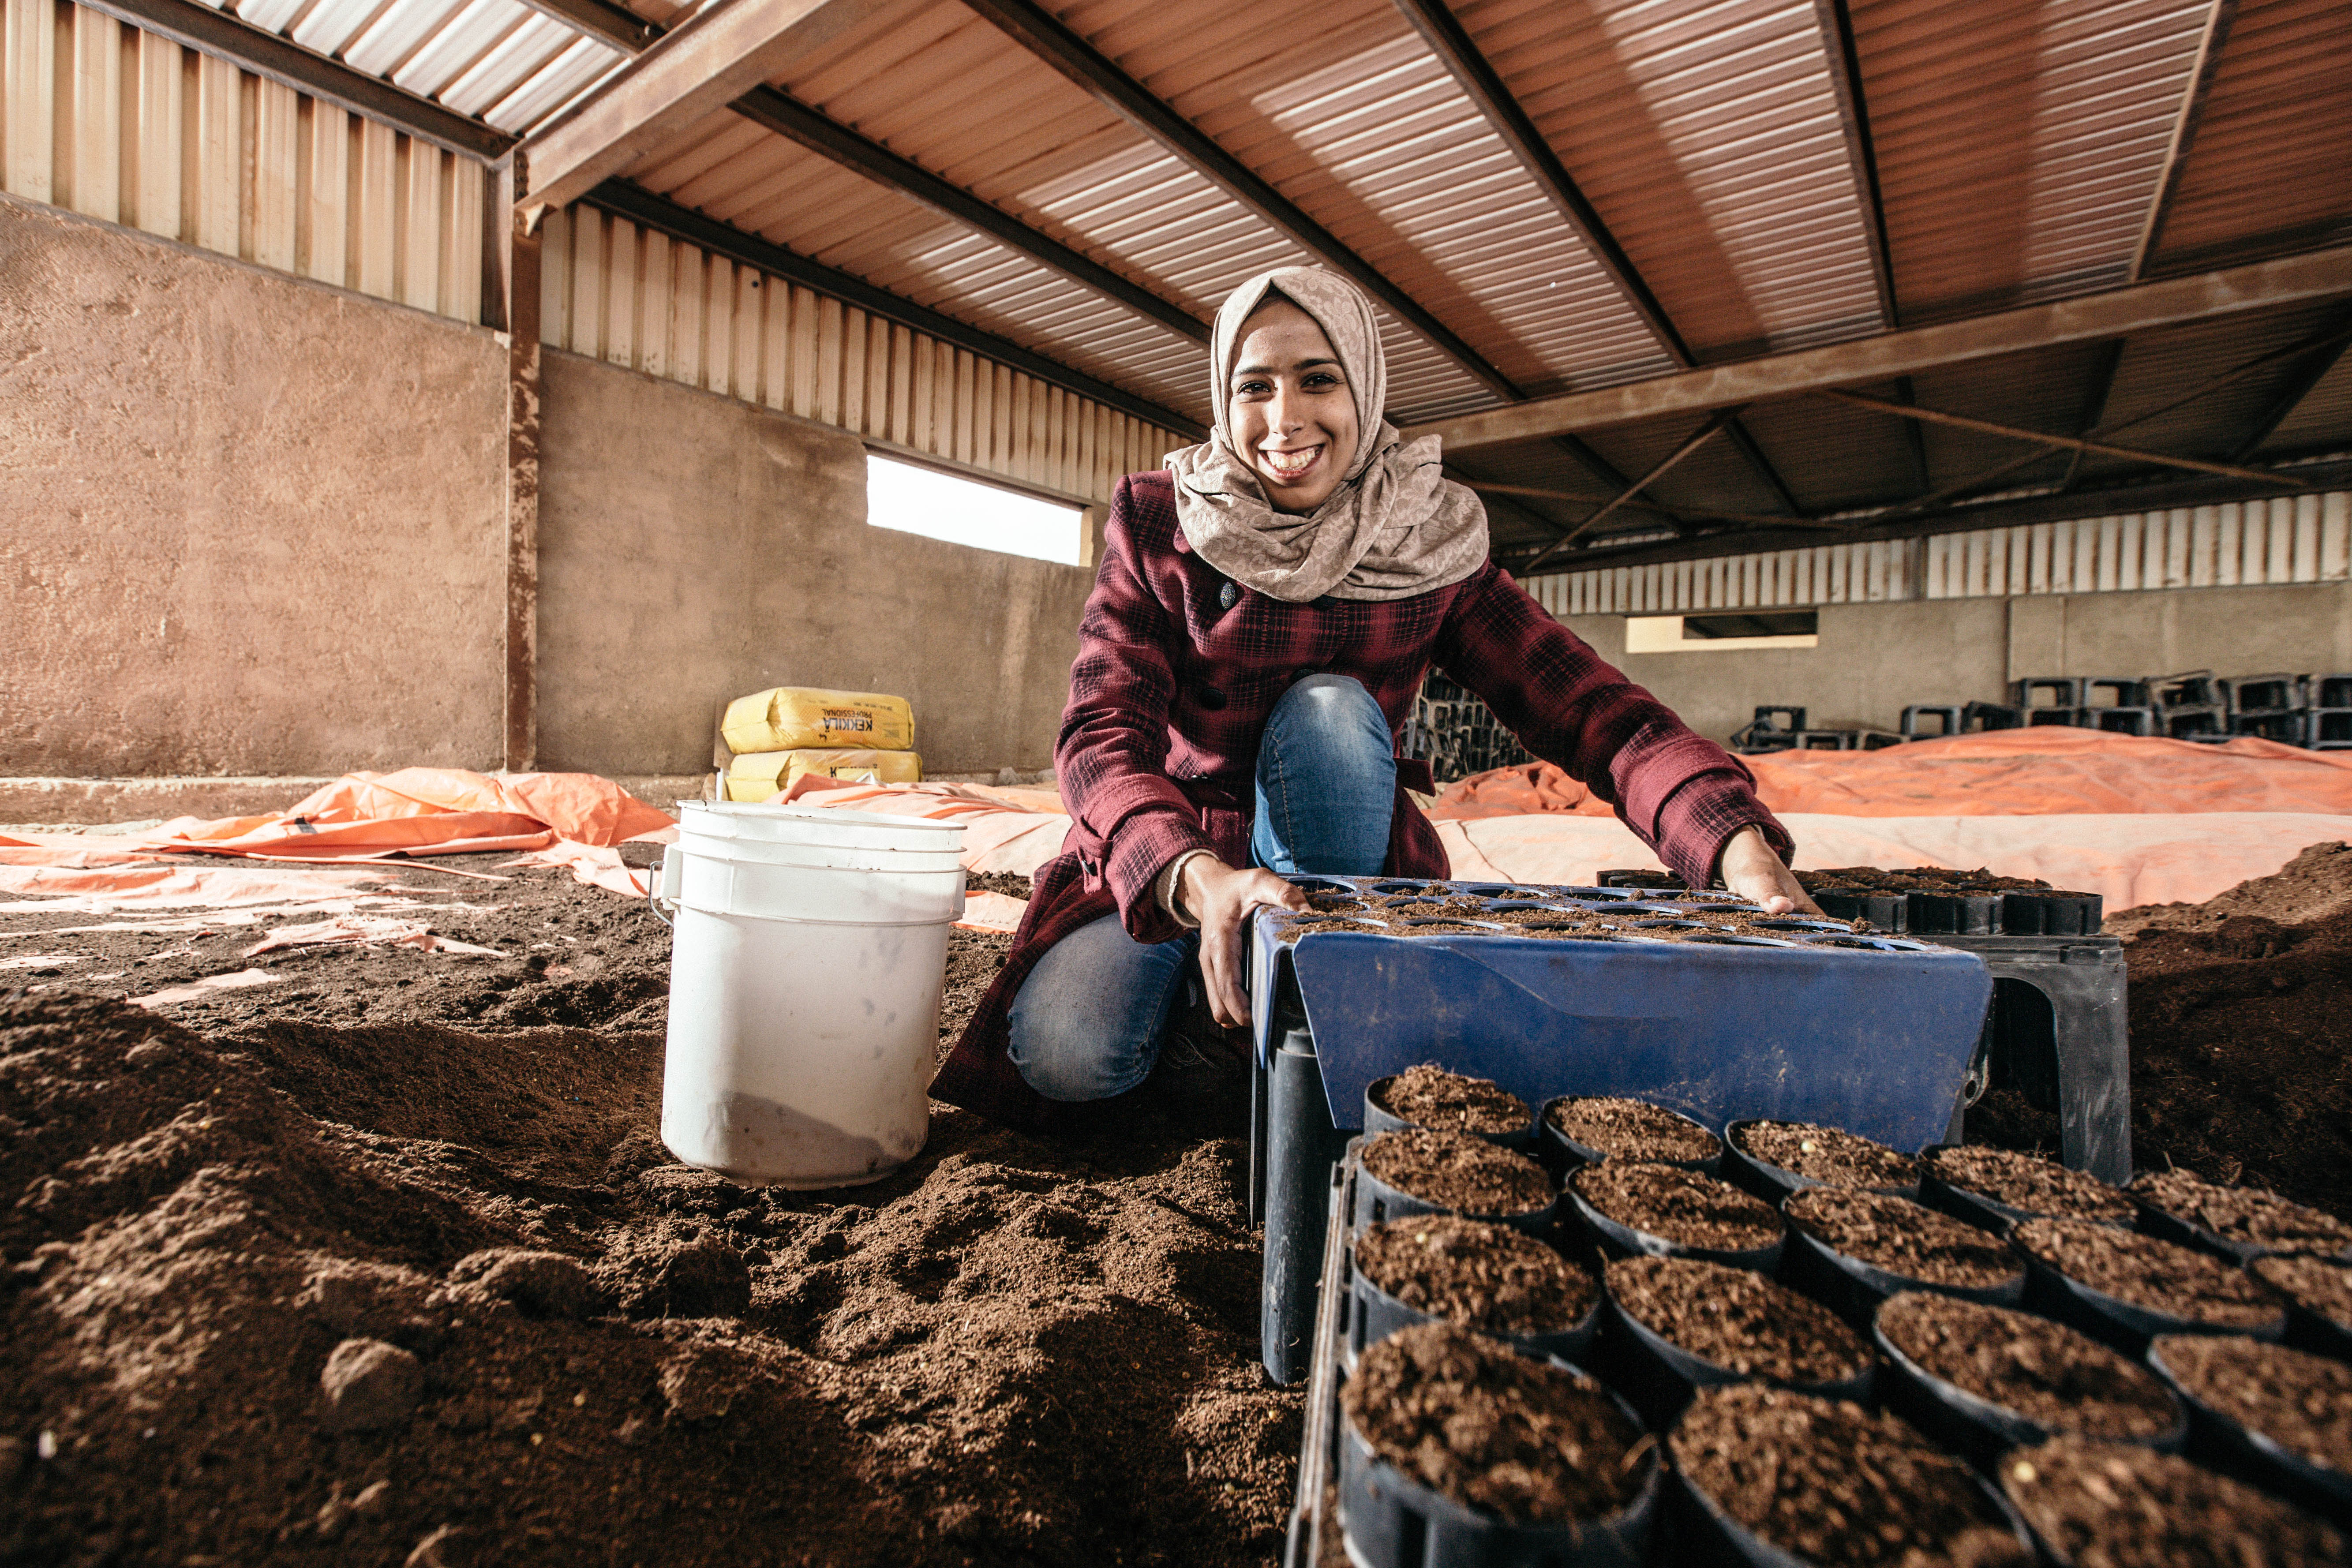 Tahani Al Masaed, Sabha Community Nursery Staff, fills containers with growing media mix to prepare for the sowing season. The containers are specialized to promote root development that will help the seedling survive harsh conditions in the Badia. Credit: USAID/Jordan